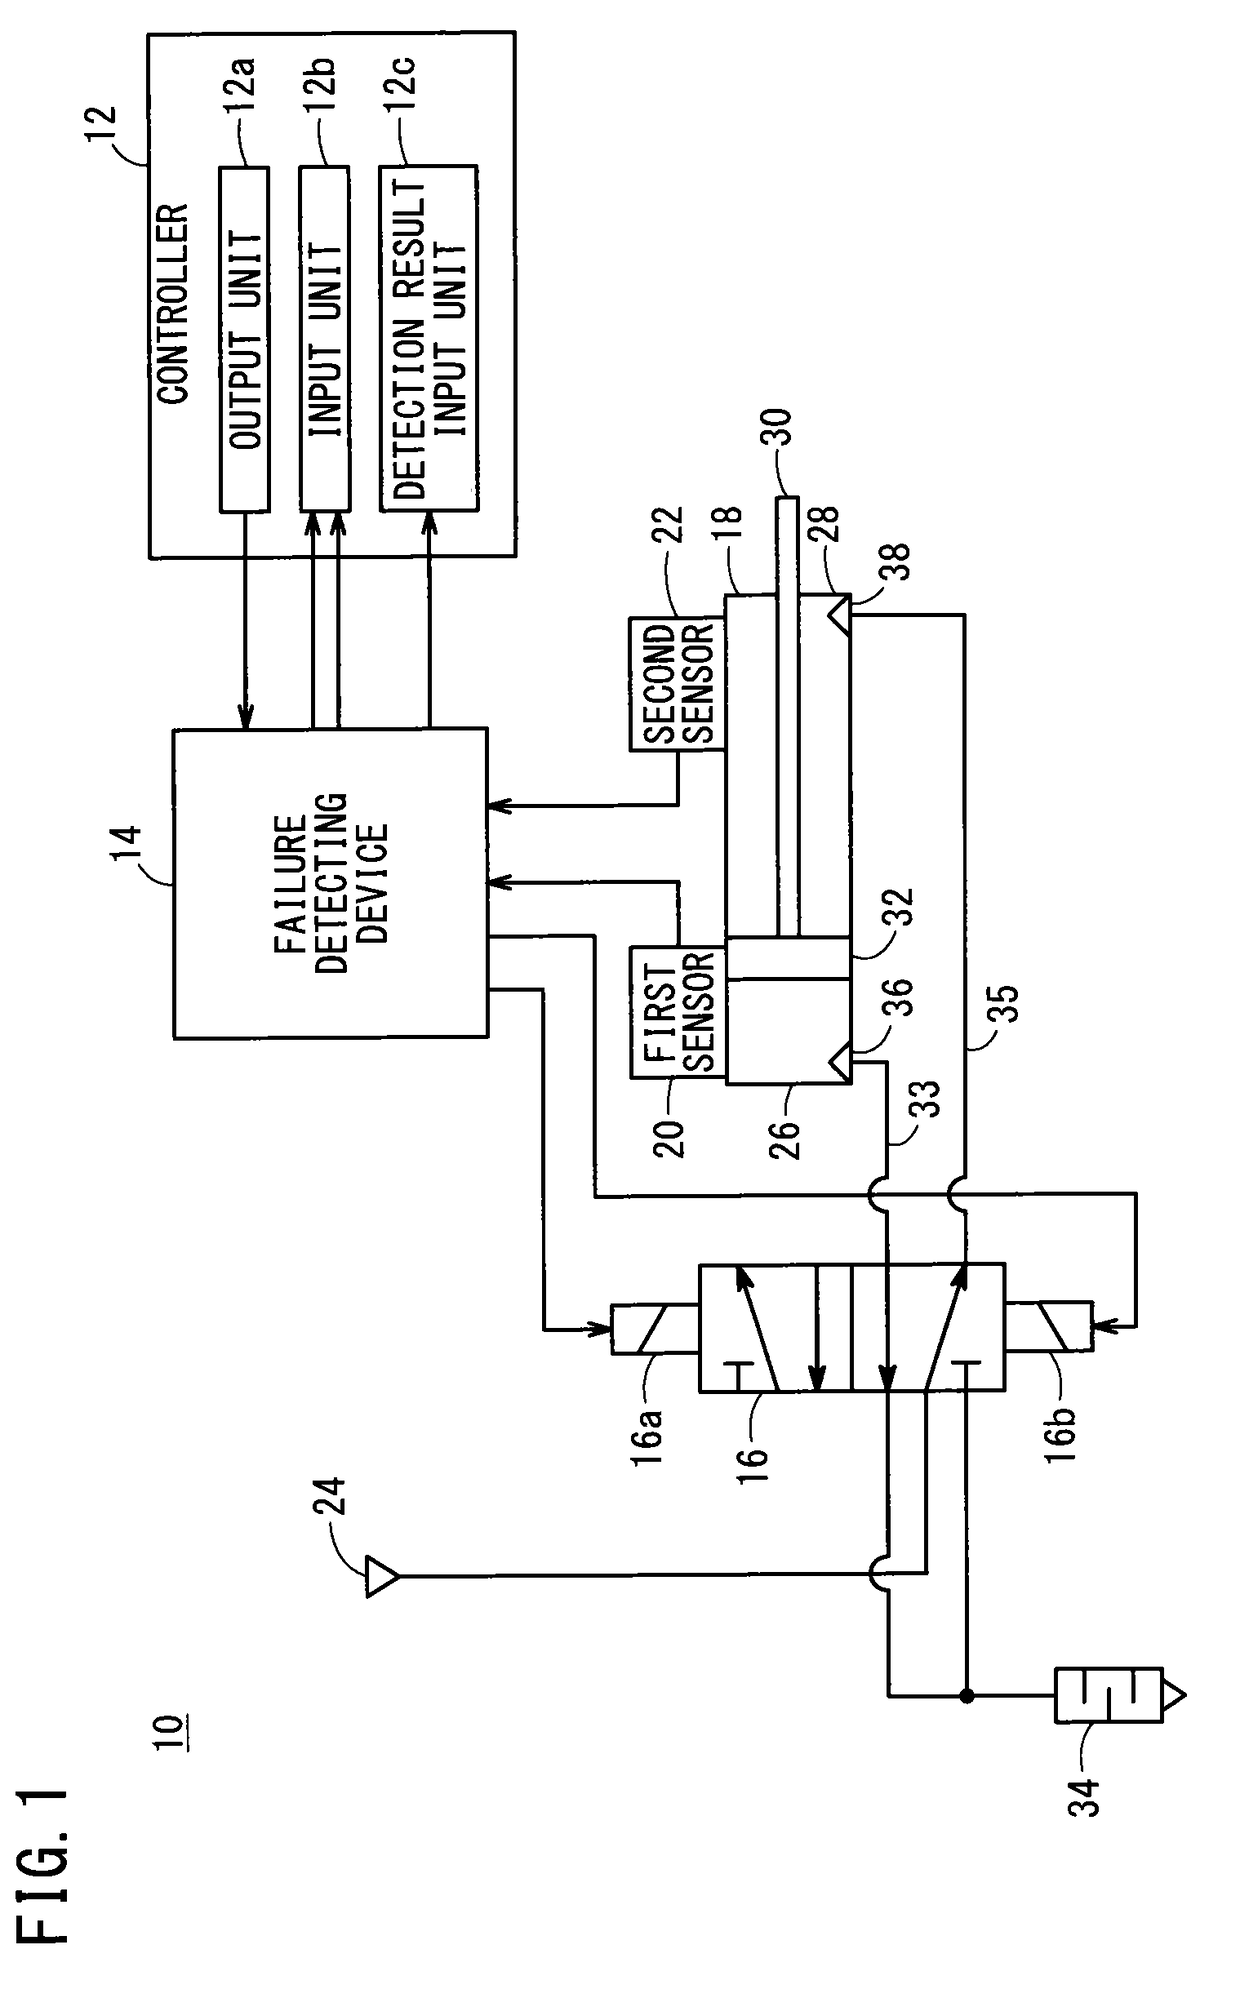 Fault detection system for actuator